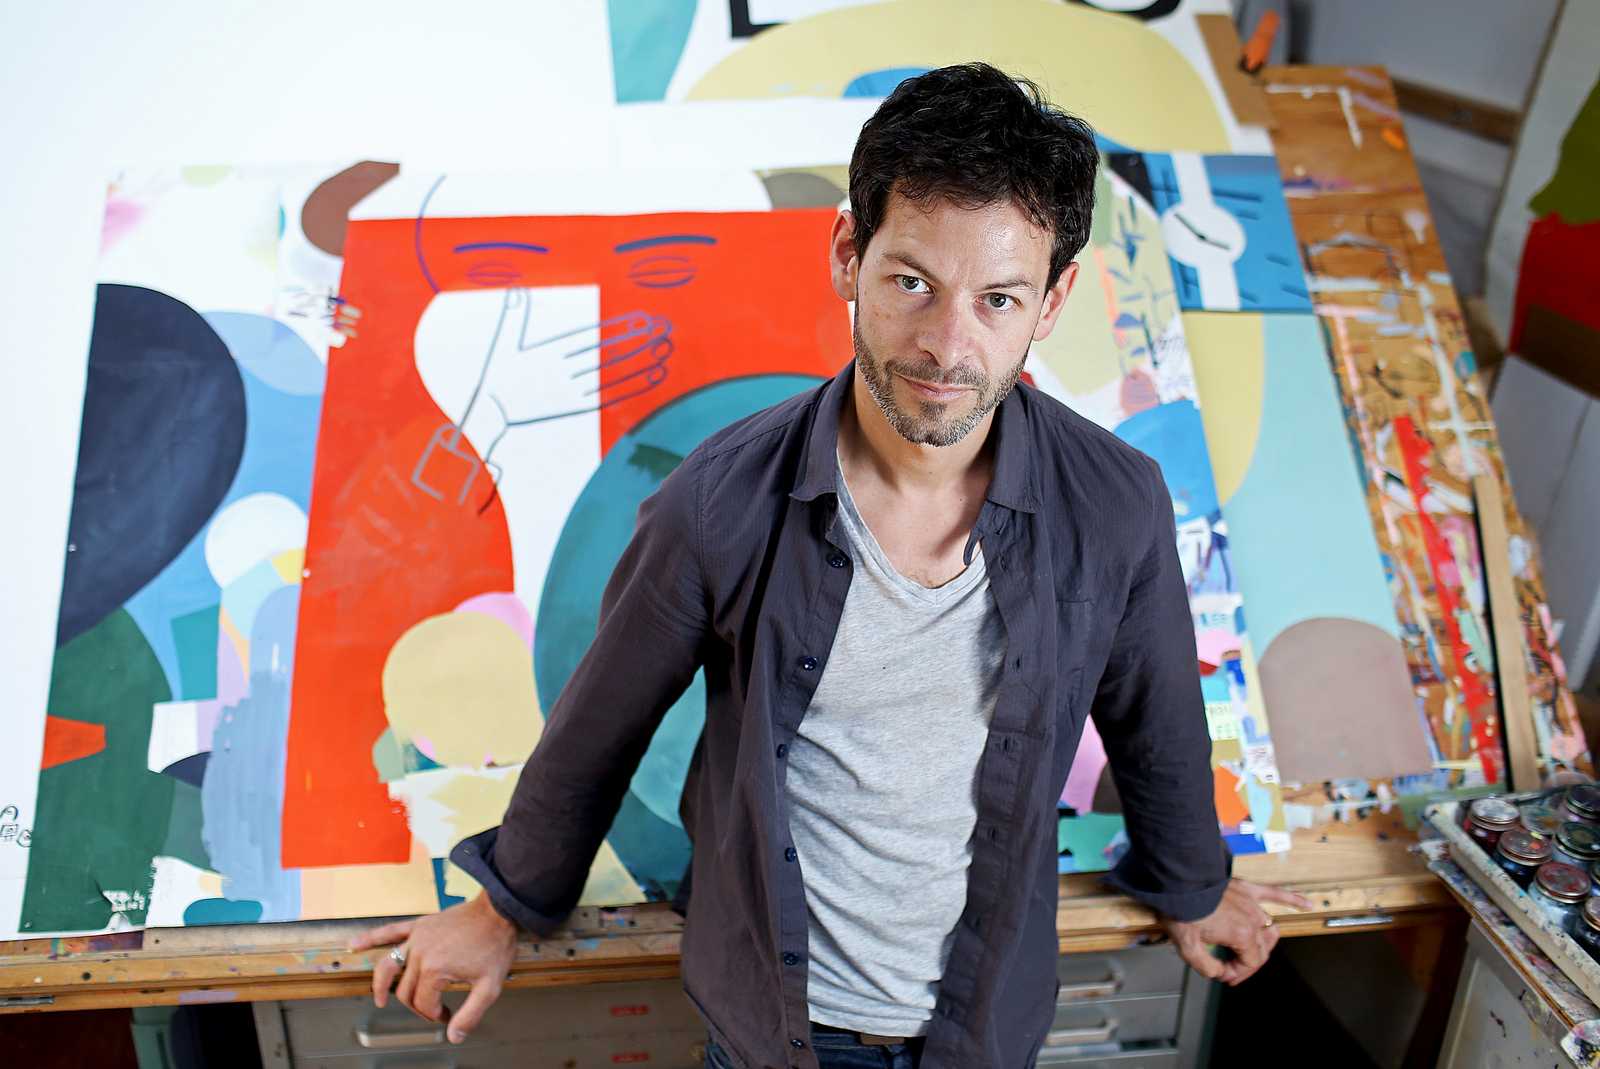 Jason Jägel, a San Francisco based local artist who is featured in the Illuminated Library Exhibit at SF State, stands in his studio located in the Mission District. Photo by Virginia Tieman / Xpress